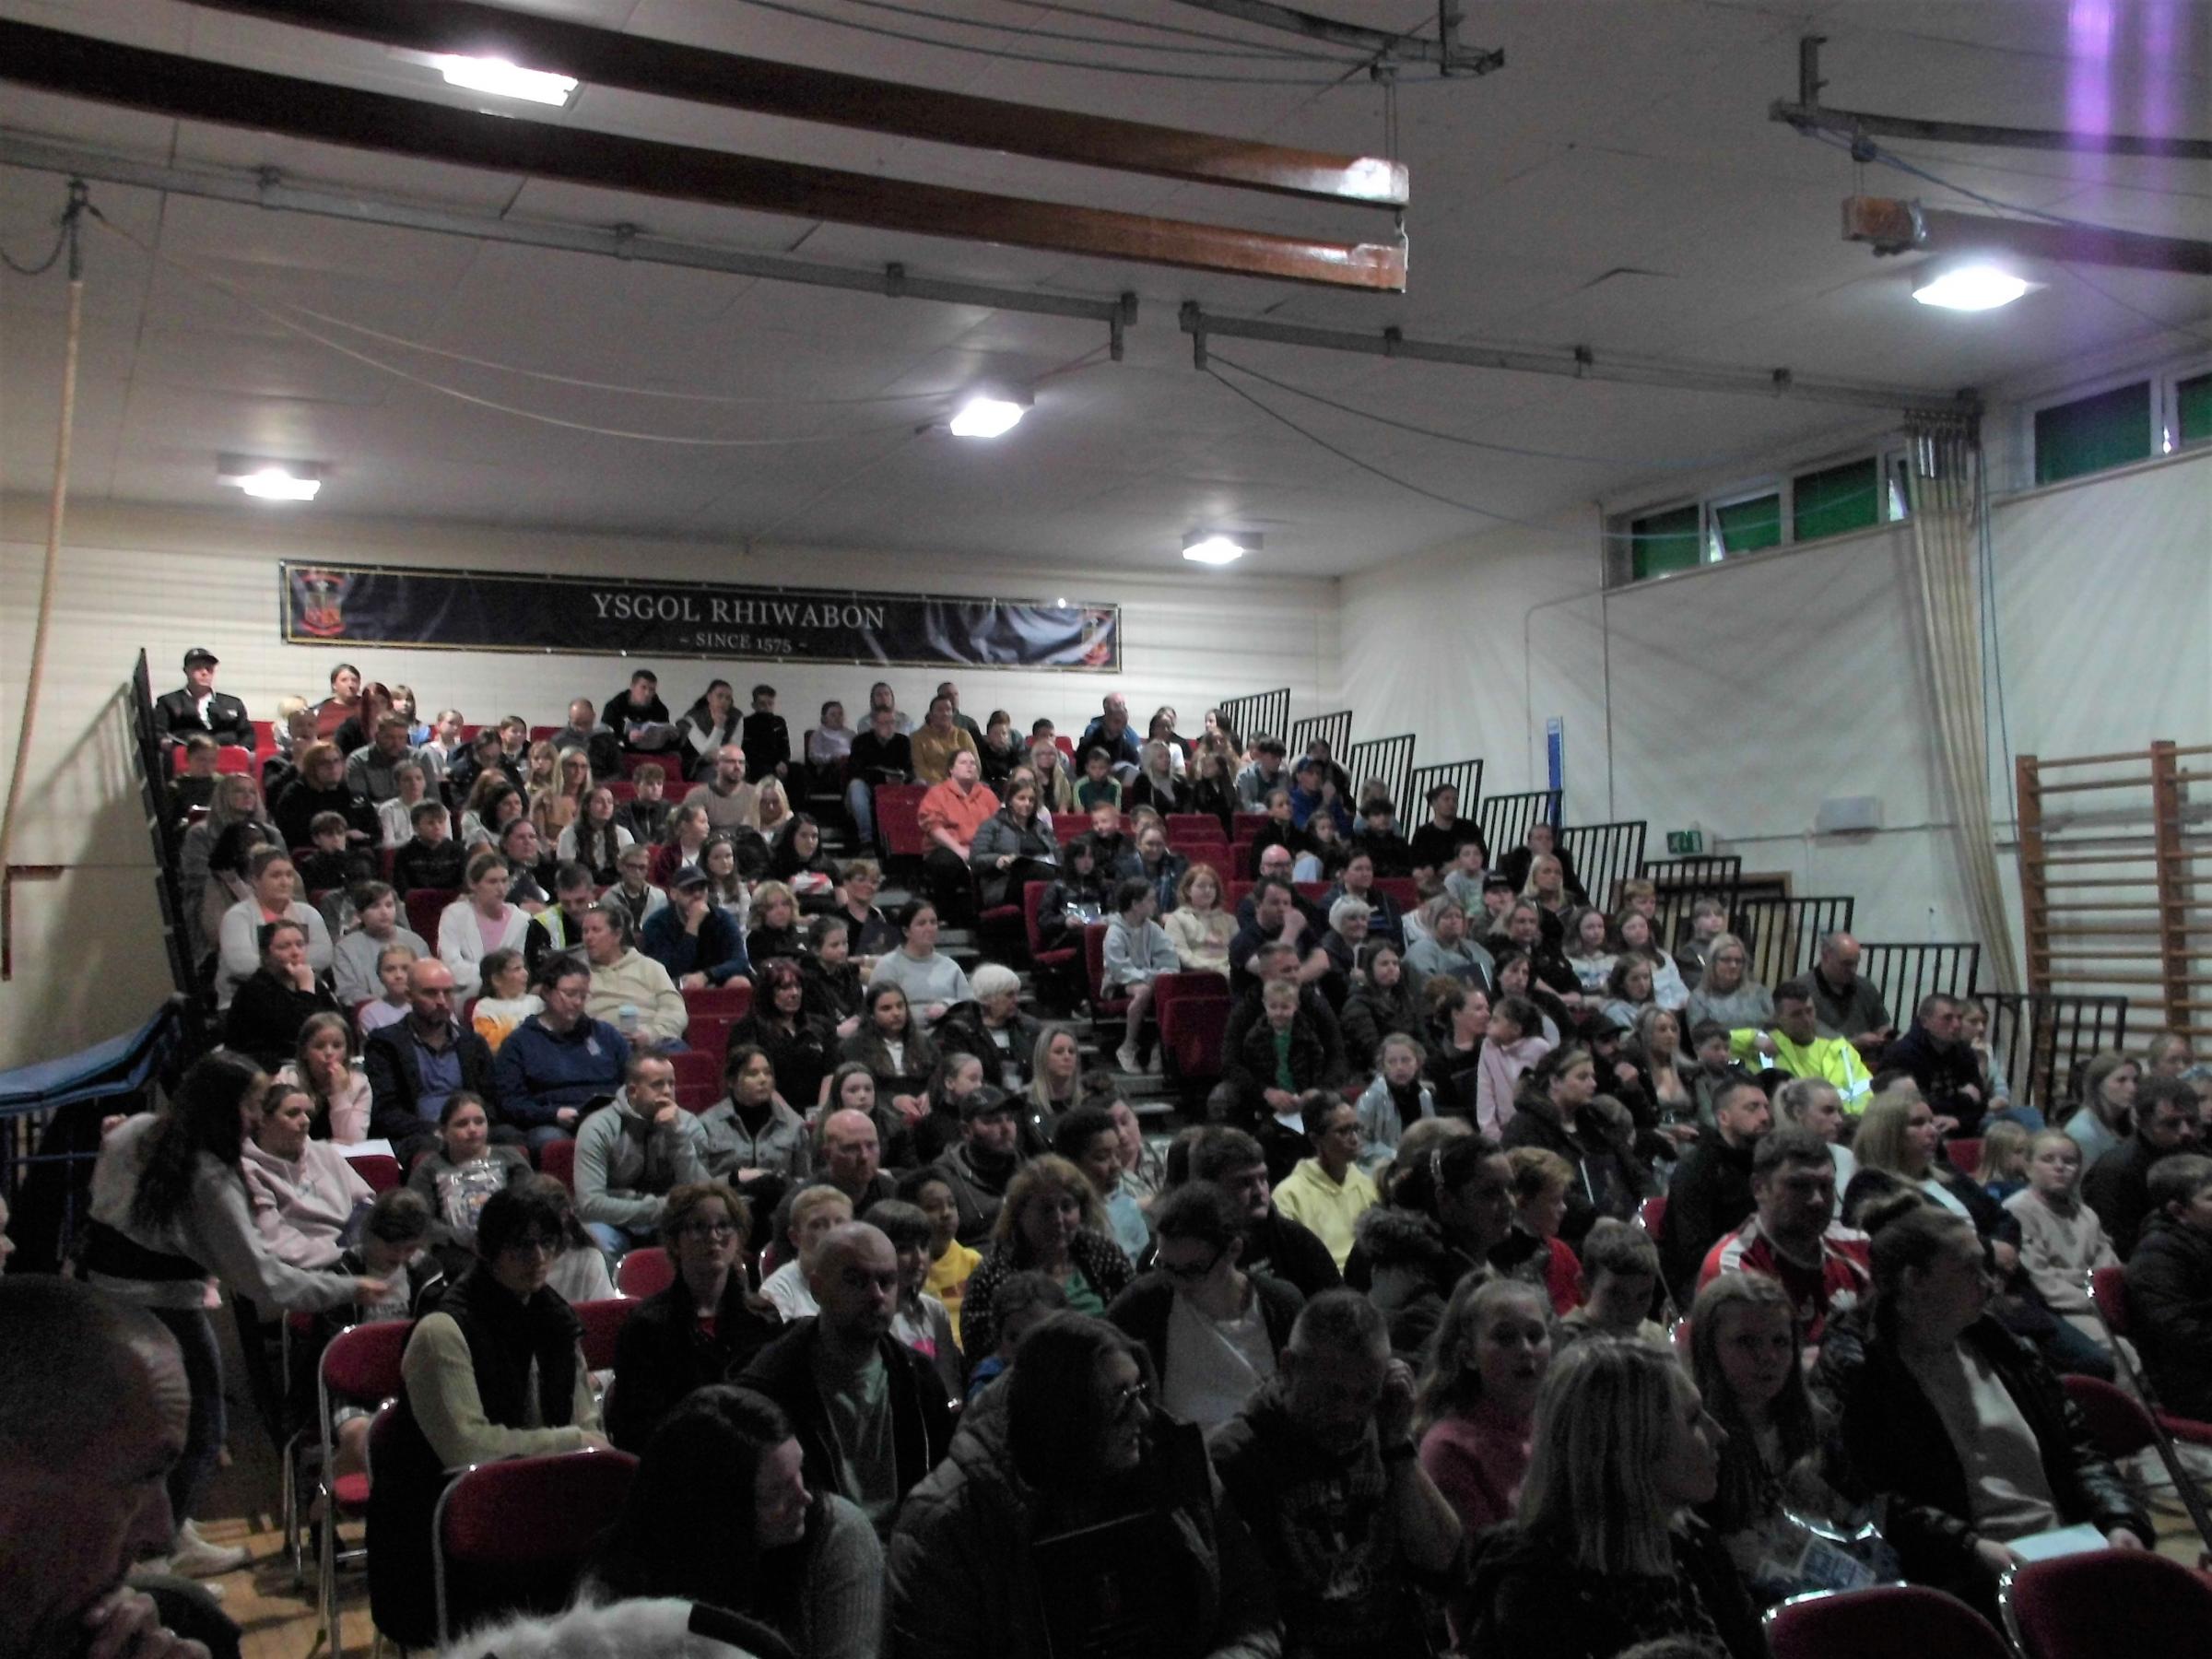 The main hall was full to overflowing at Ysgol Rhiwabons Open Evening.